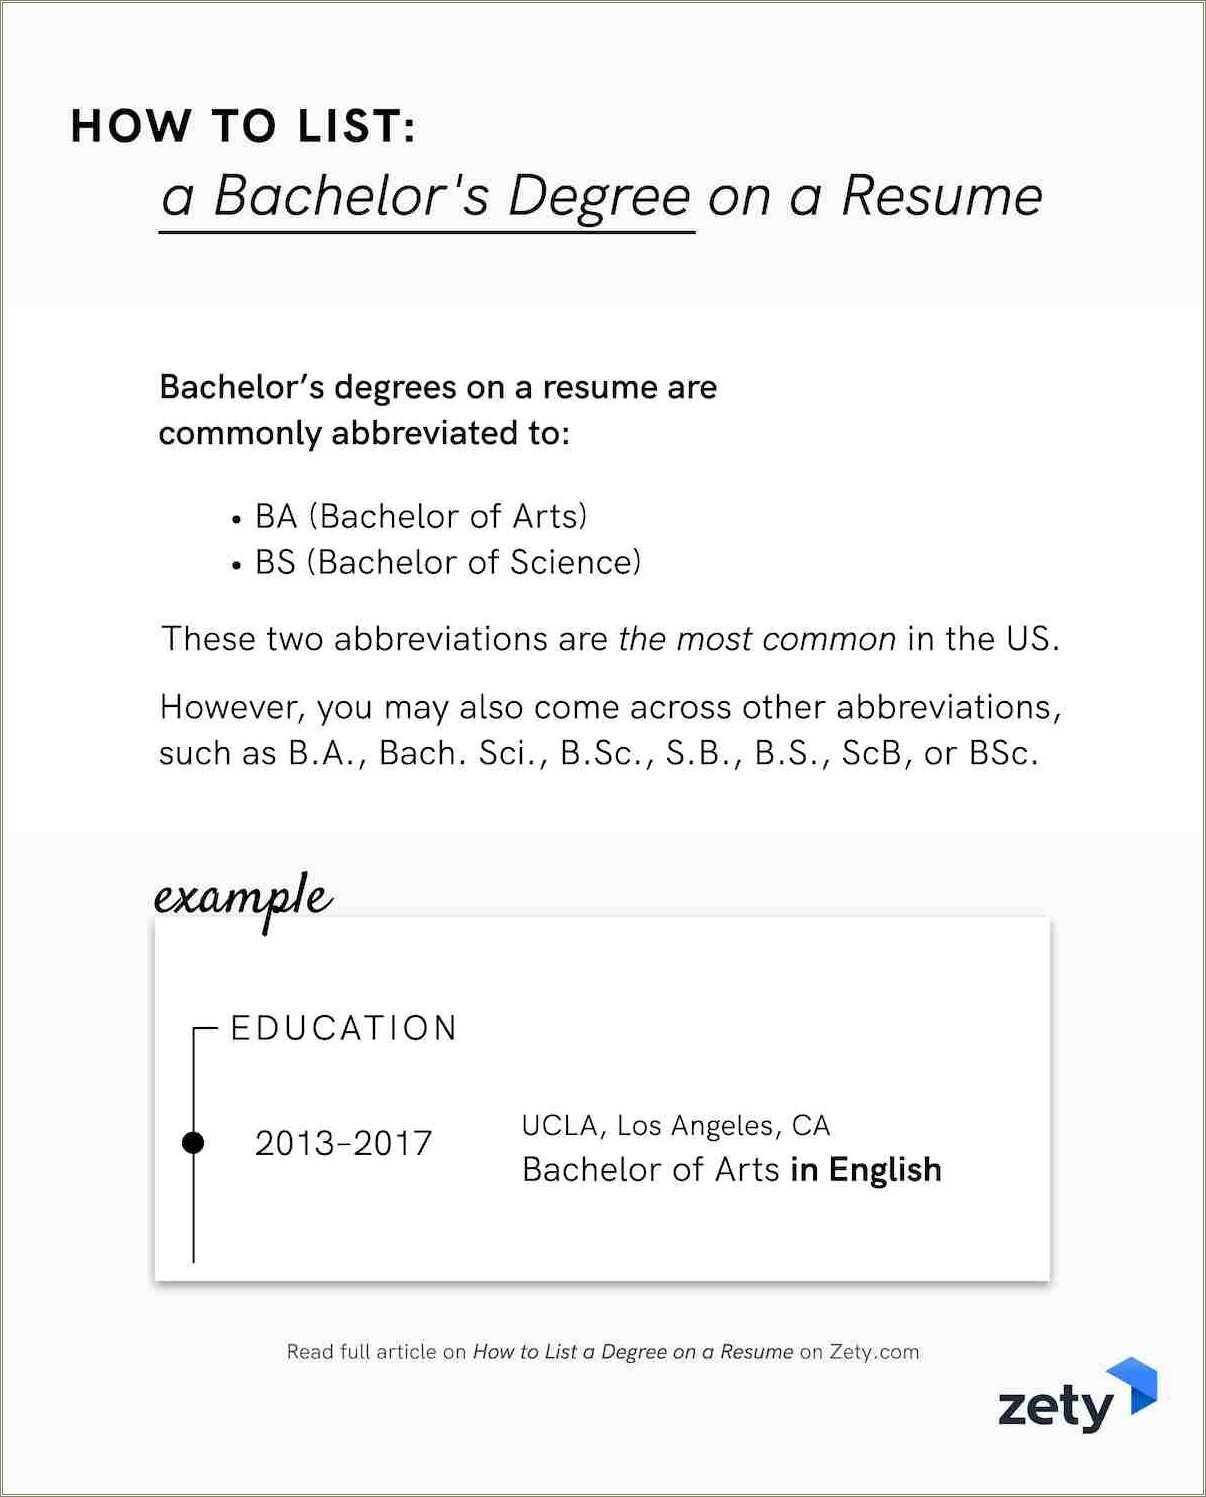 how to write pursuing phd in resume